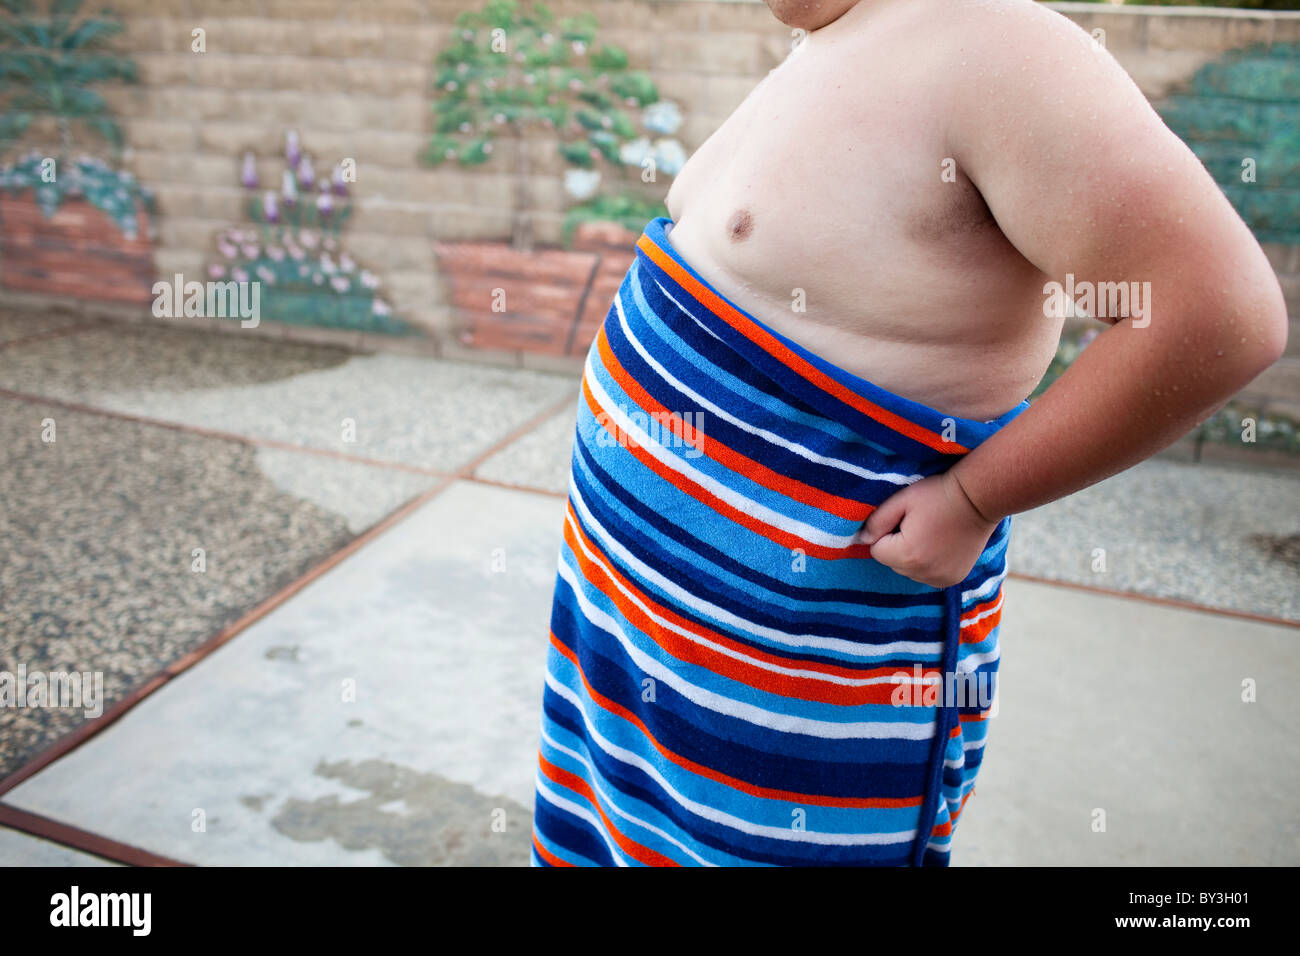 Hughson, California, United States.  An obese teen wrapped up in a towel. Stock Photo